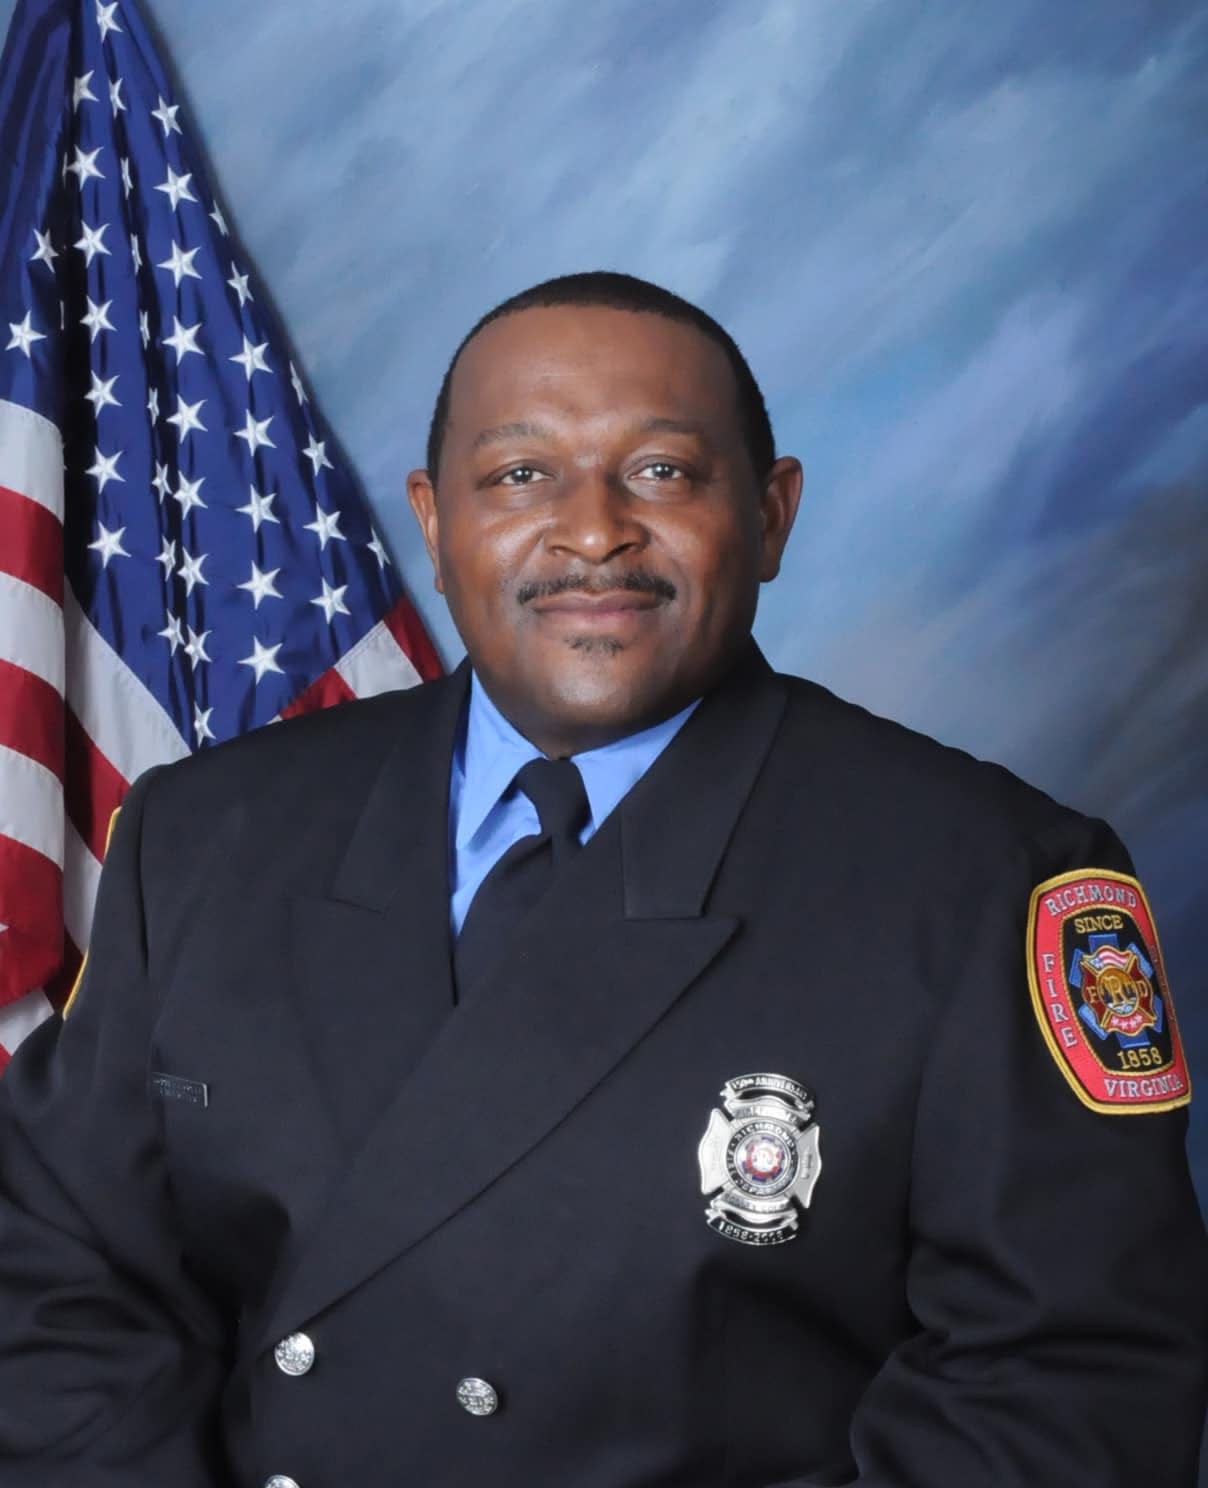 Friday would have been Rodney Coles' 15th anniversary as a Richmond firefighter, the Richmond Fire Department noted in a Facebook post. Coles, 49, who lived in Petersburg, crashed his car after suffering a medical emergency and died Thursday, Aug. 3, 2023, on Interstate 95 in Chesterfield County.